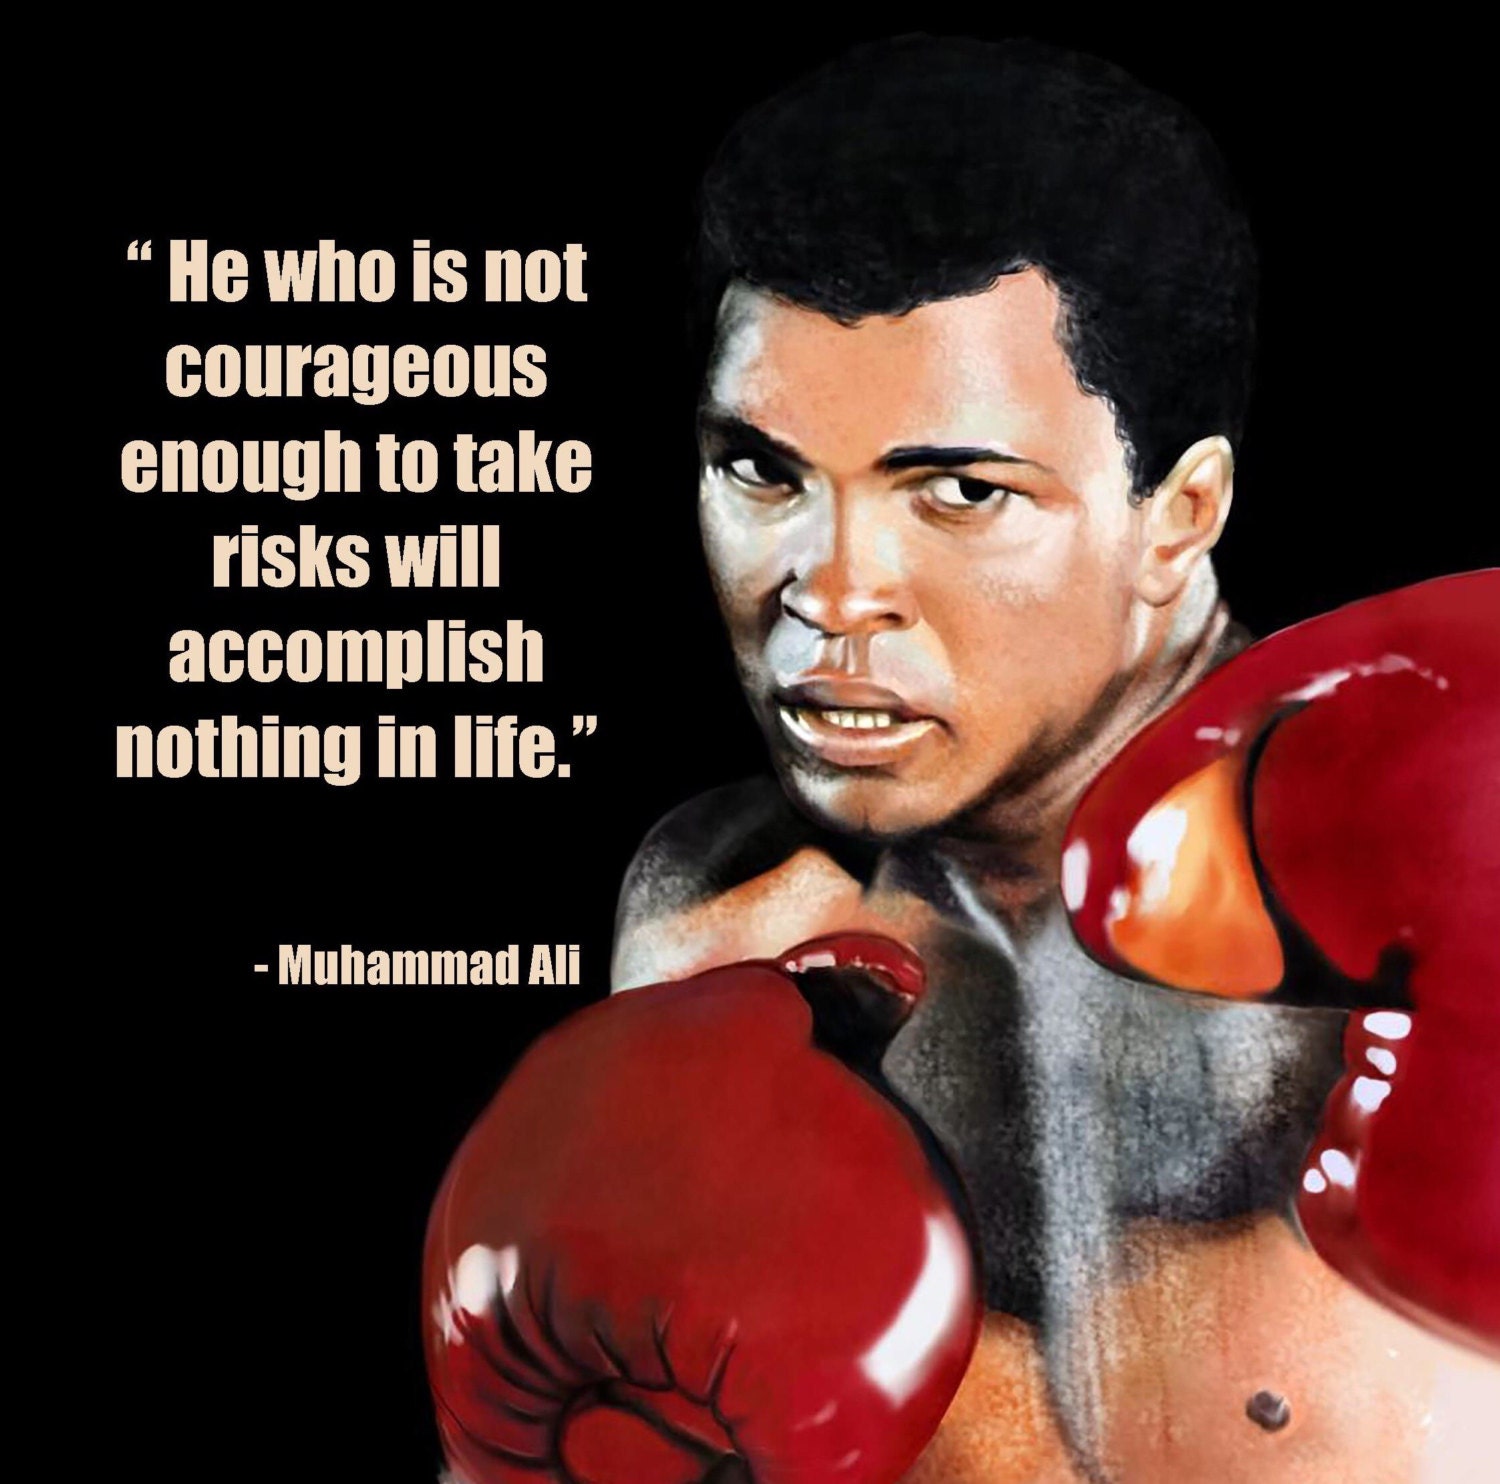 Boxing Legend Muhammad Ali Inspirational Courageous Life Quote pic